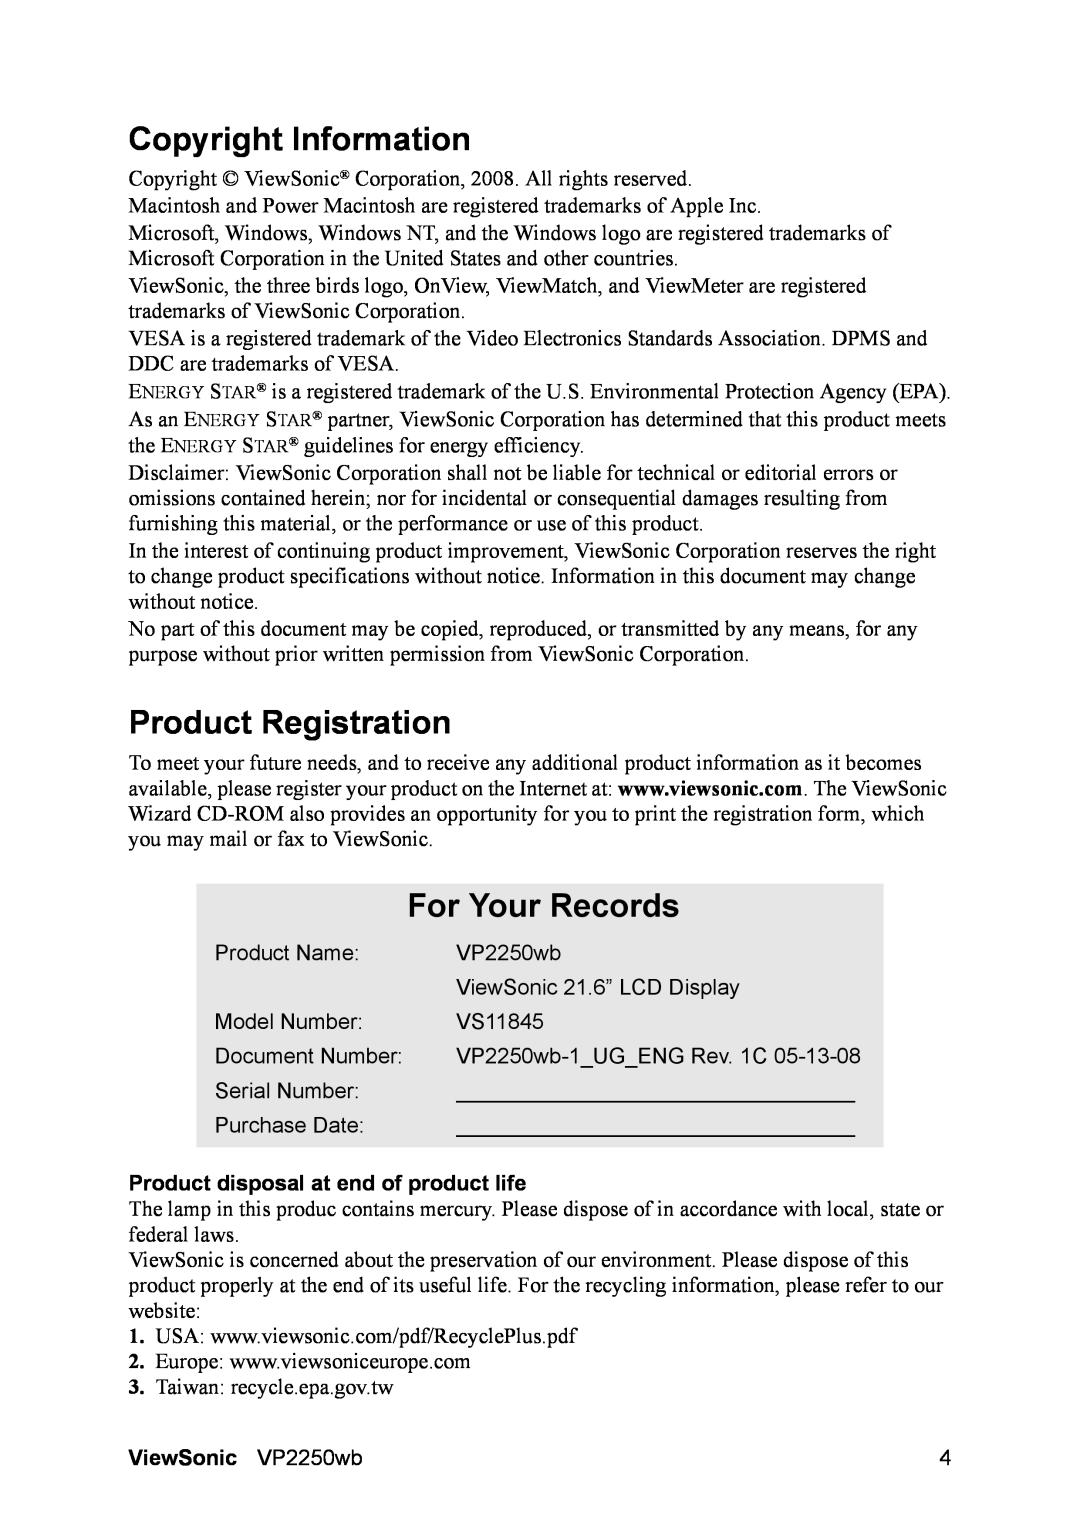 ViewSonic VS11845 Copyright Information, Product Registration, For Your Records, Product disposal at end of product life 